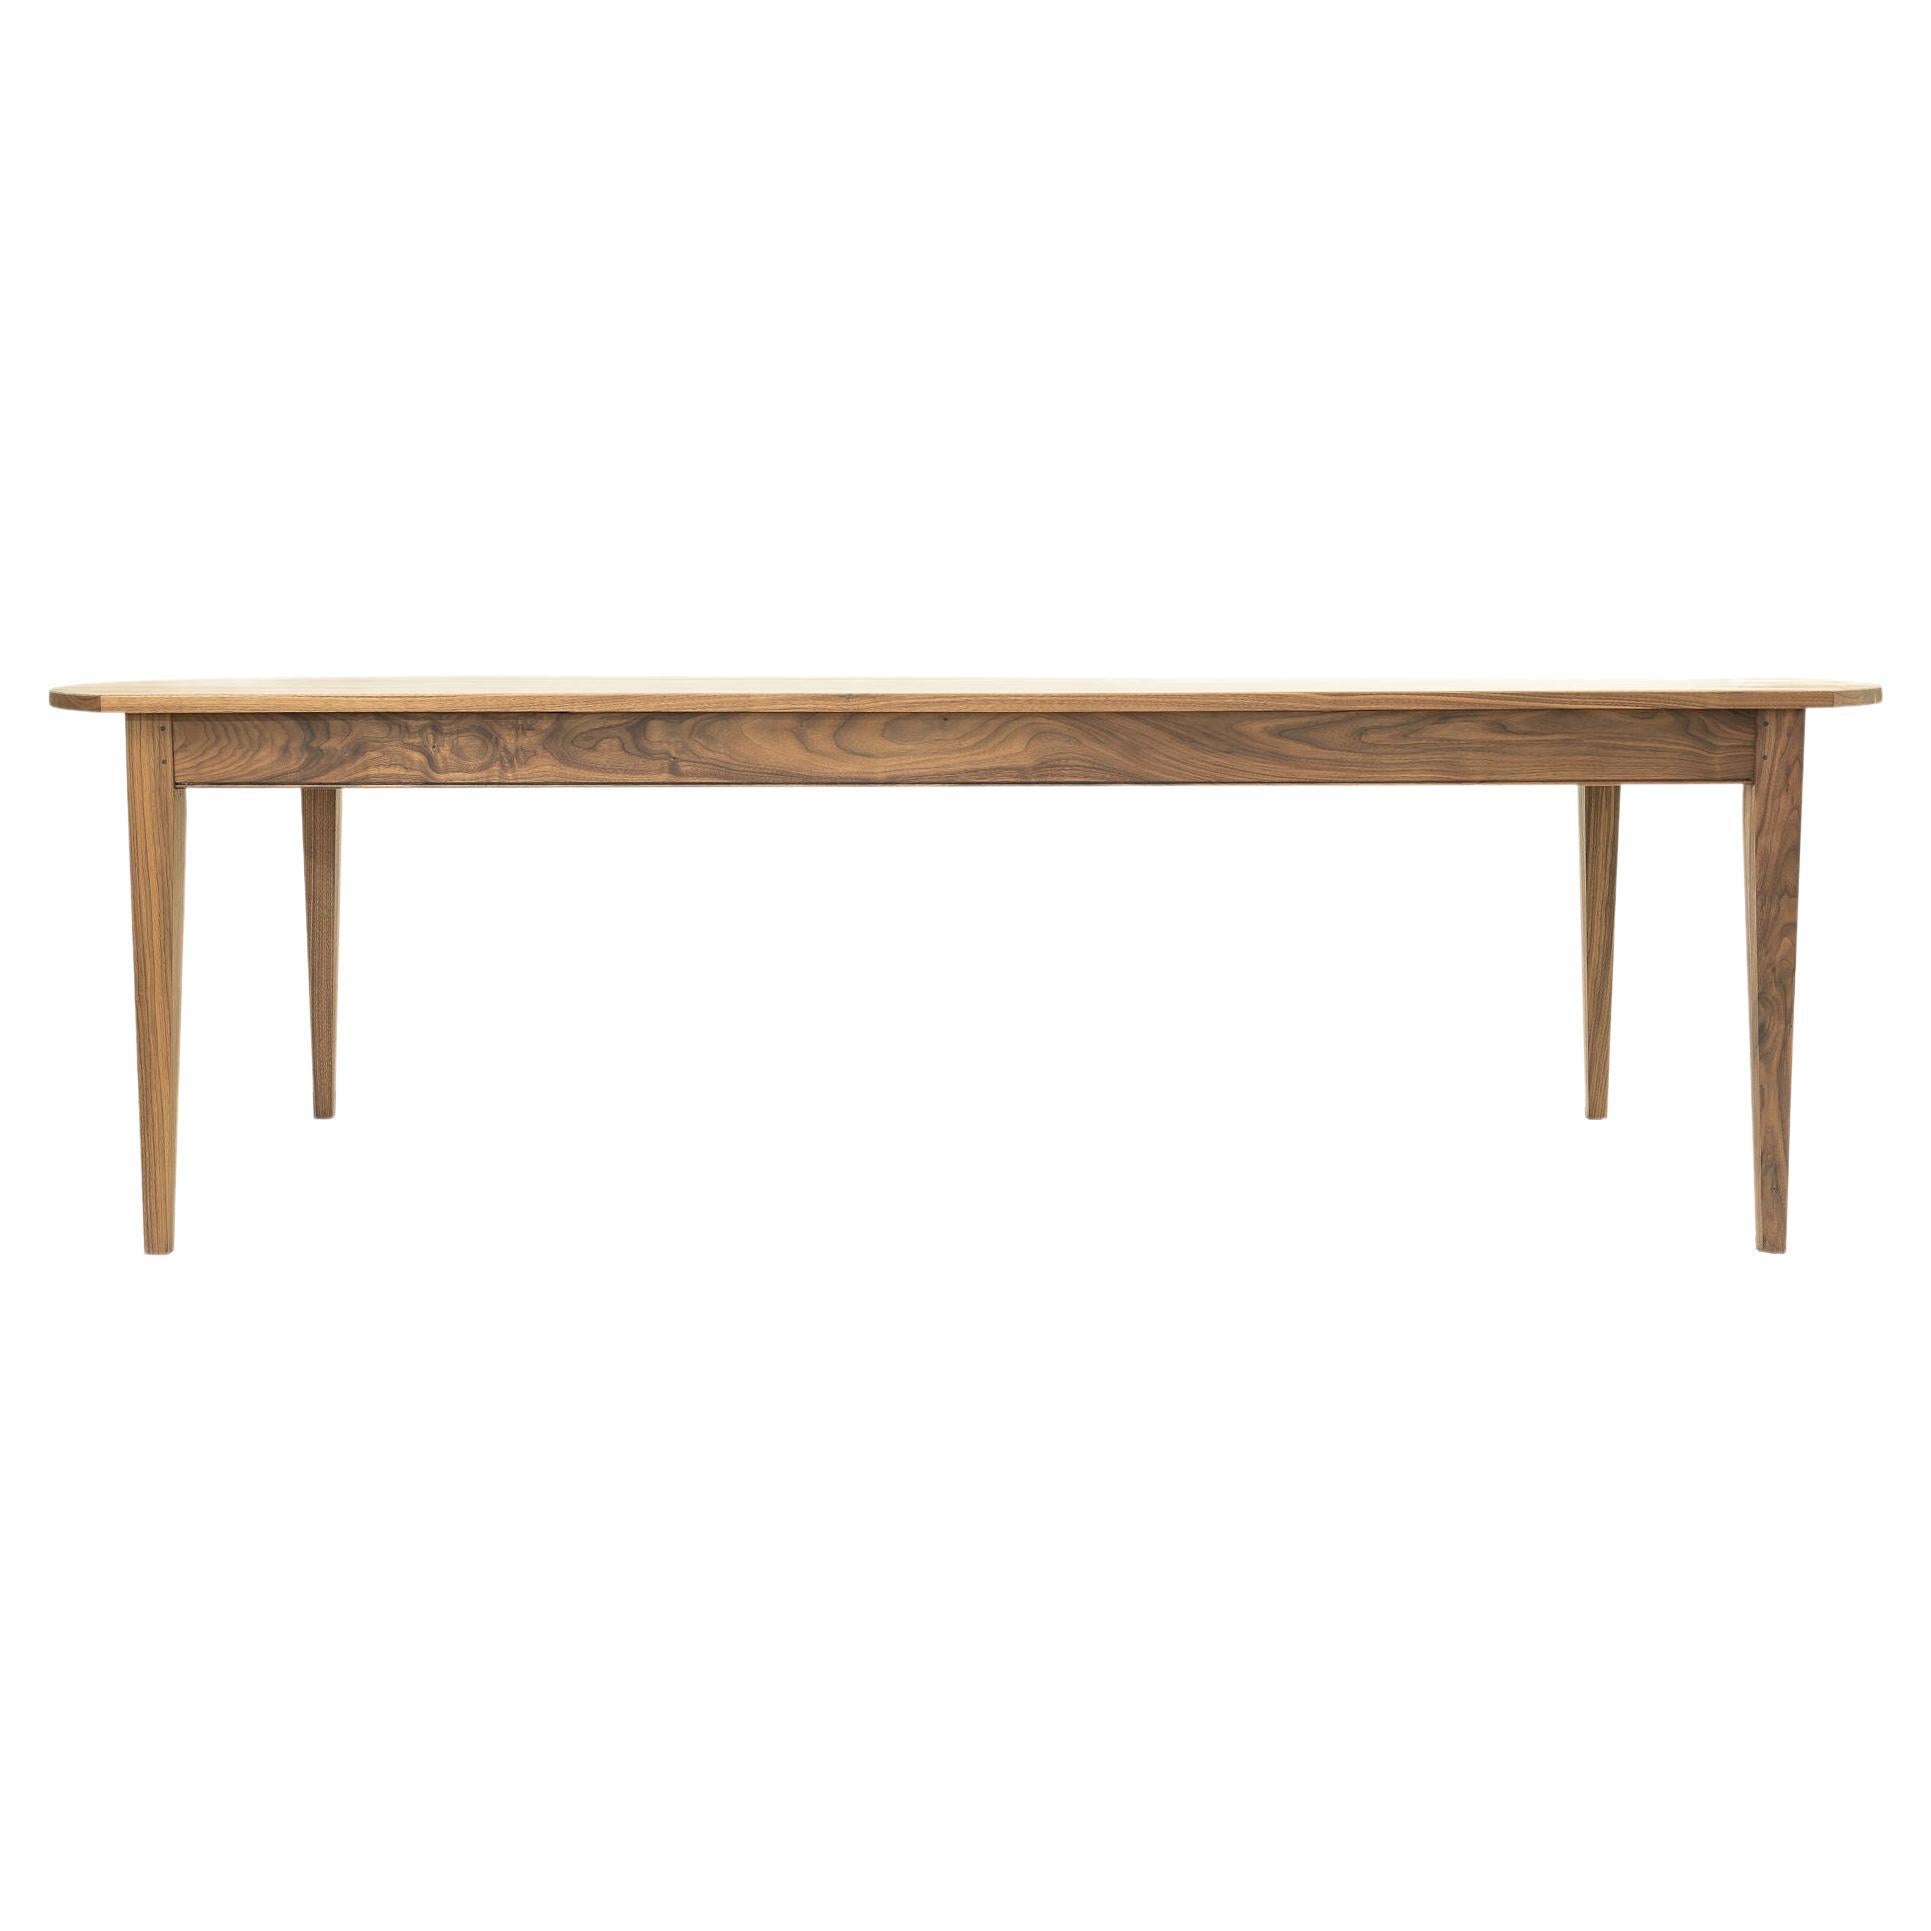 Adair Table, Refined English Rustic Dining Table in Walnut For Sale